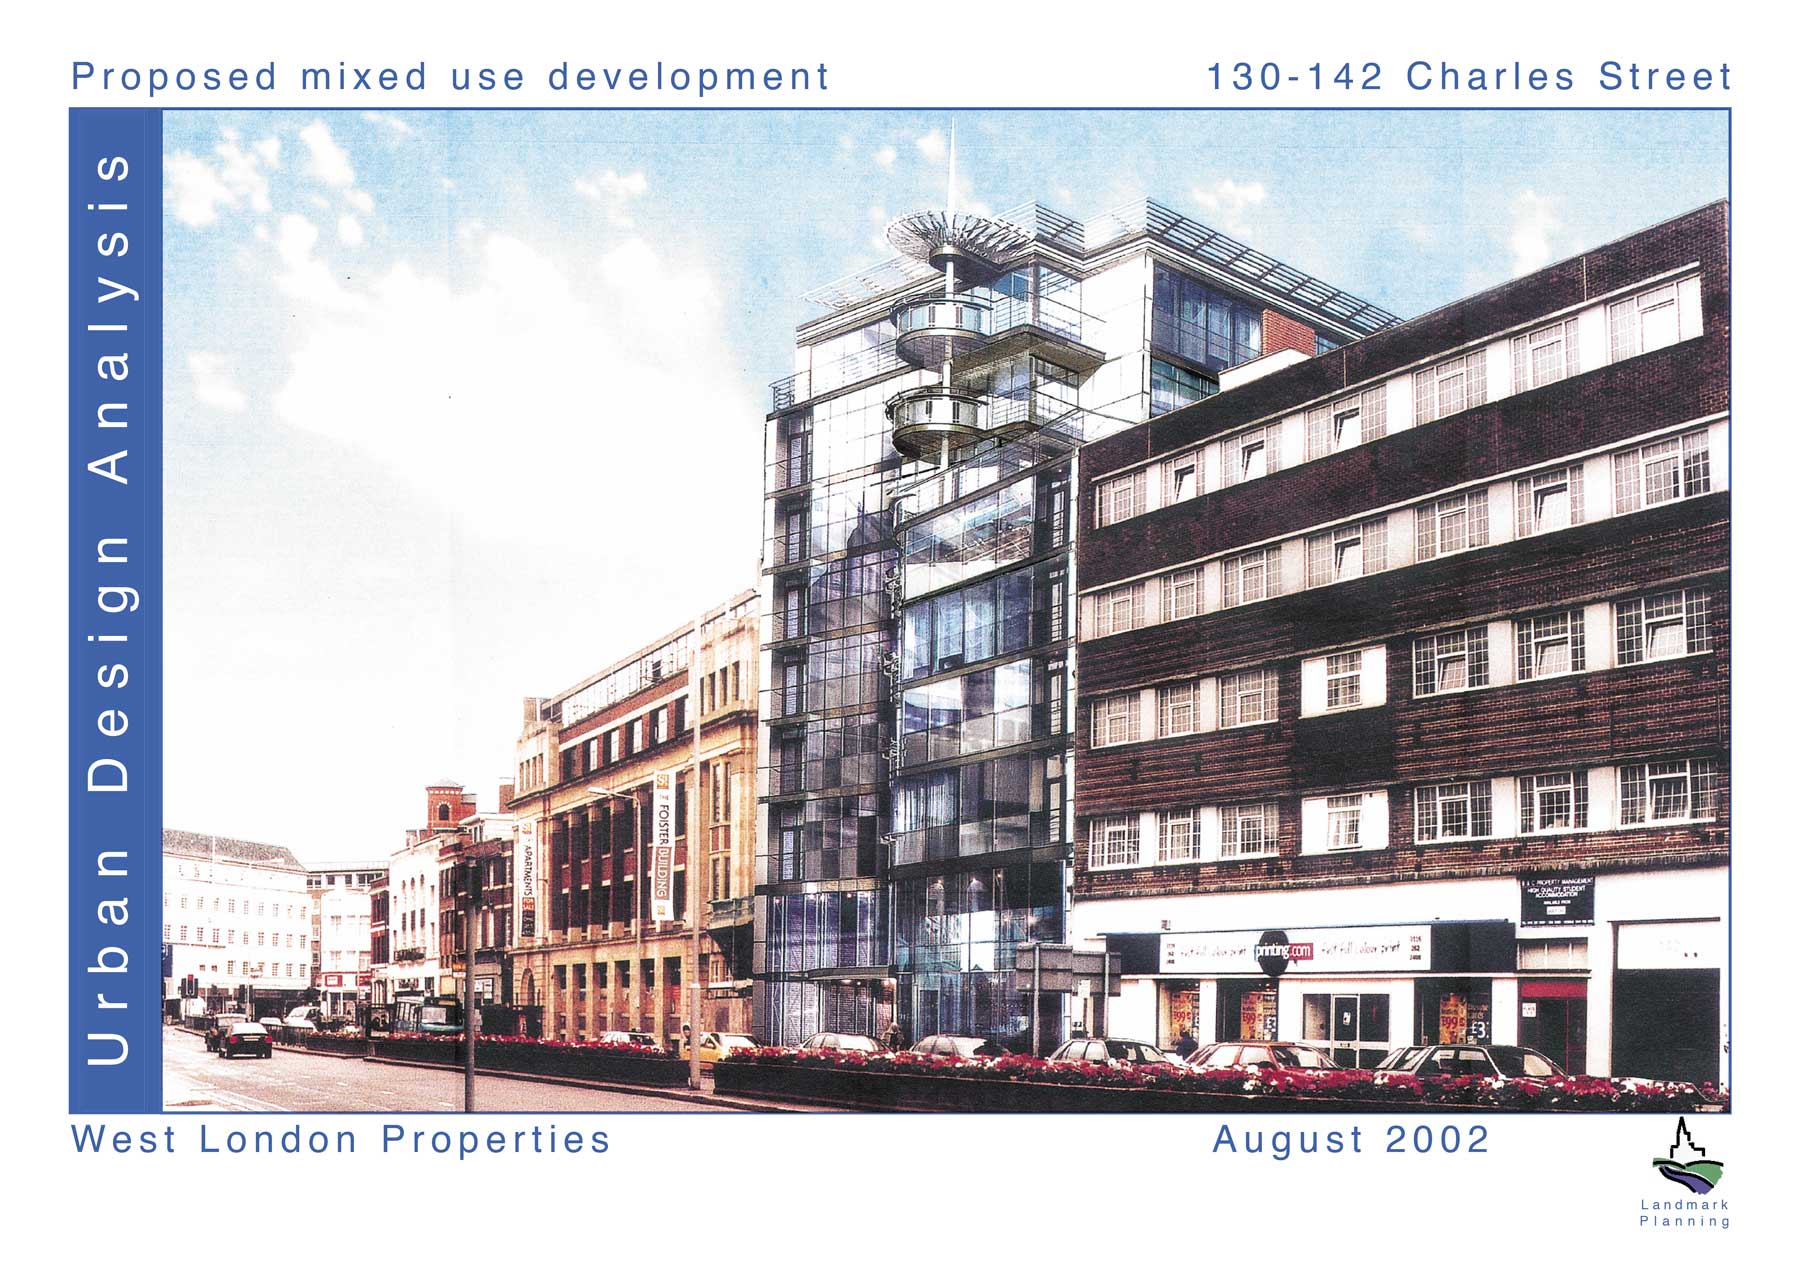 Image of the front cover showing Charles Street with various city buildings and apartments